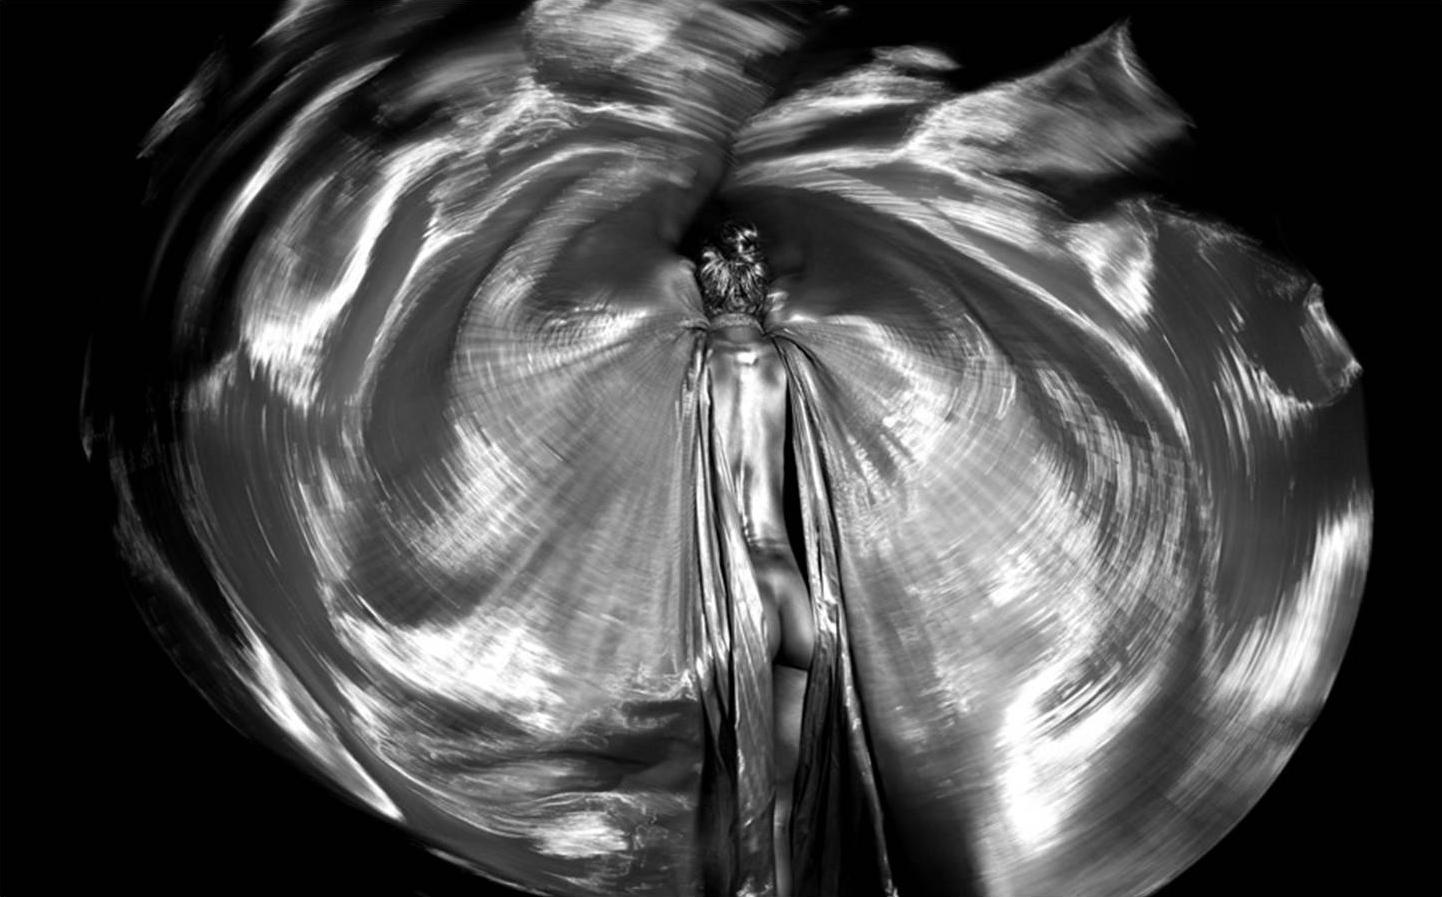 Series: ARGENTUM
All available sizes and editions:

30" x 40" editions of 18
40" x 60" editions of 7
48" x 72" editions of 3

Archival Pigment Print on Fine Art Baryta paper
Mounted and Framed

Guido Argentini was born in Florence, Italy in 1966. He